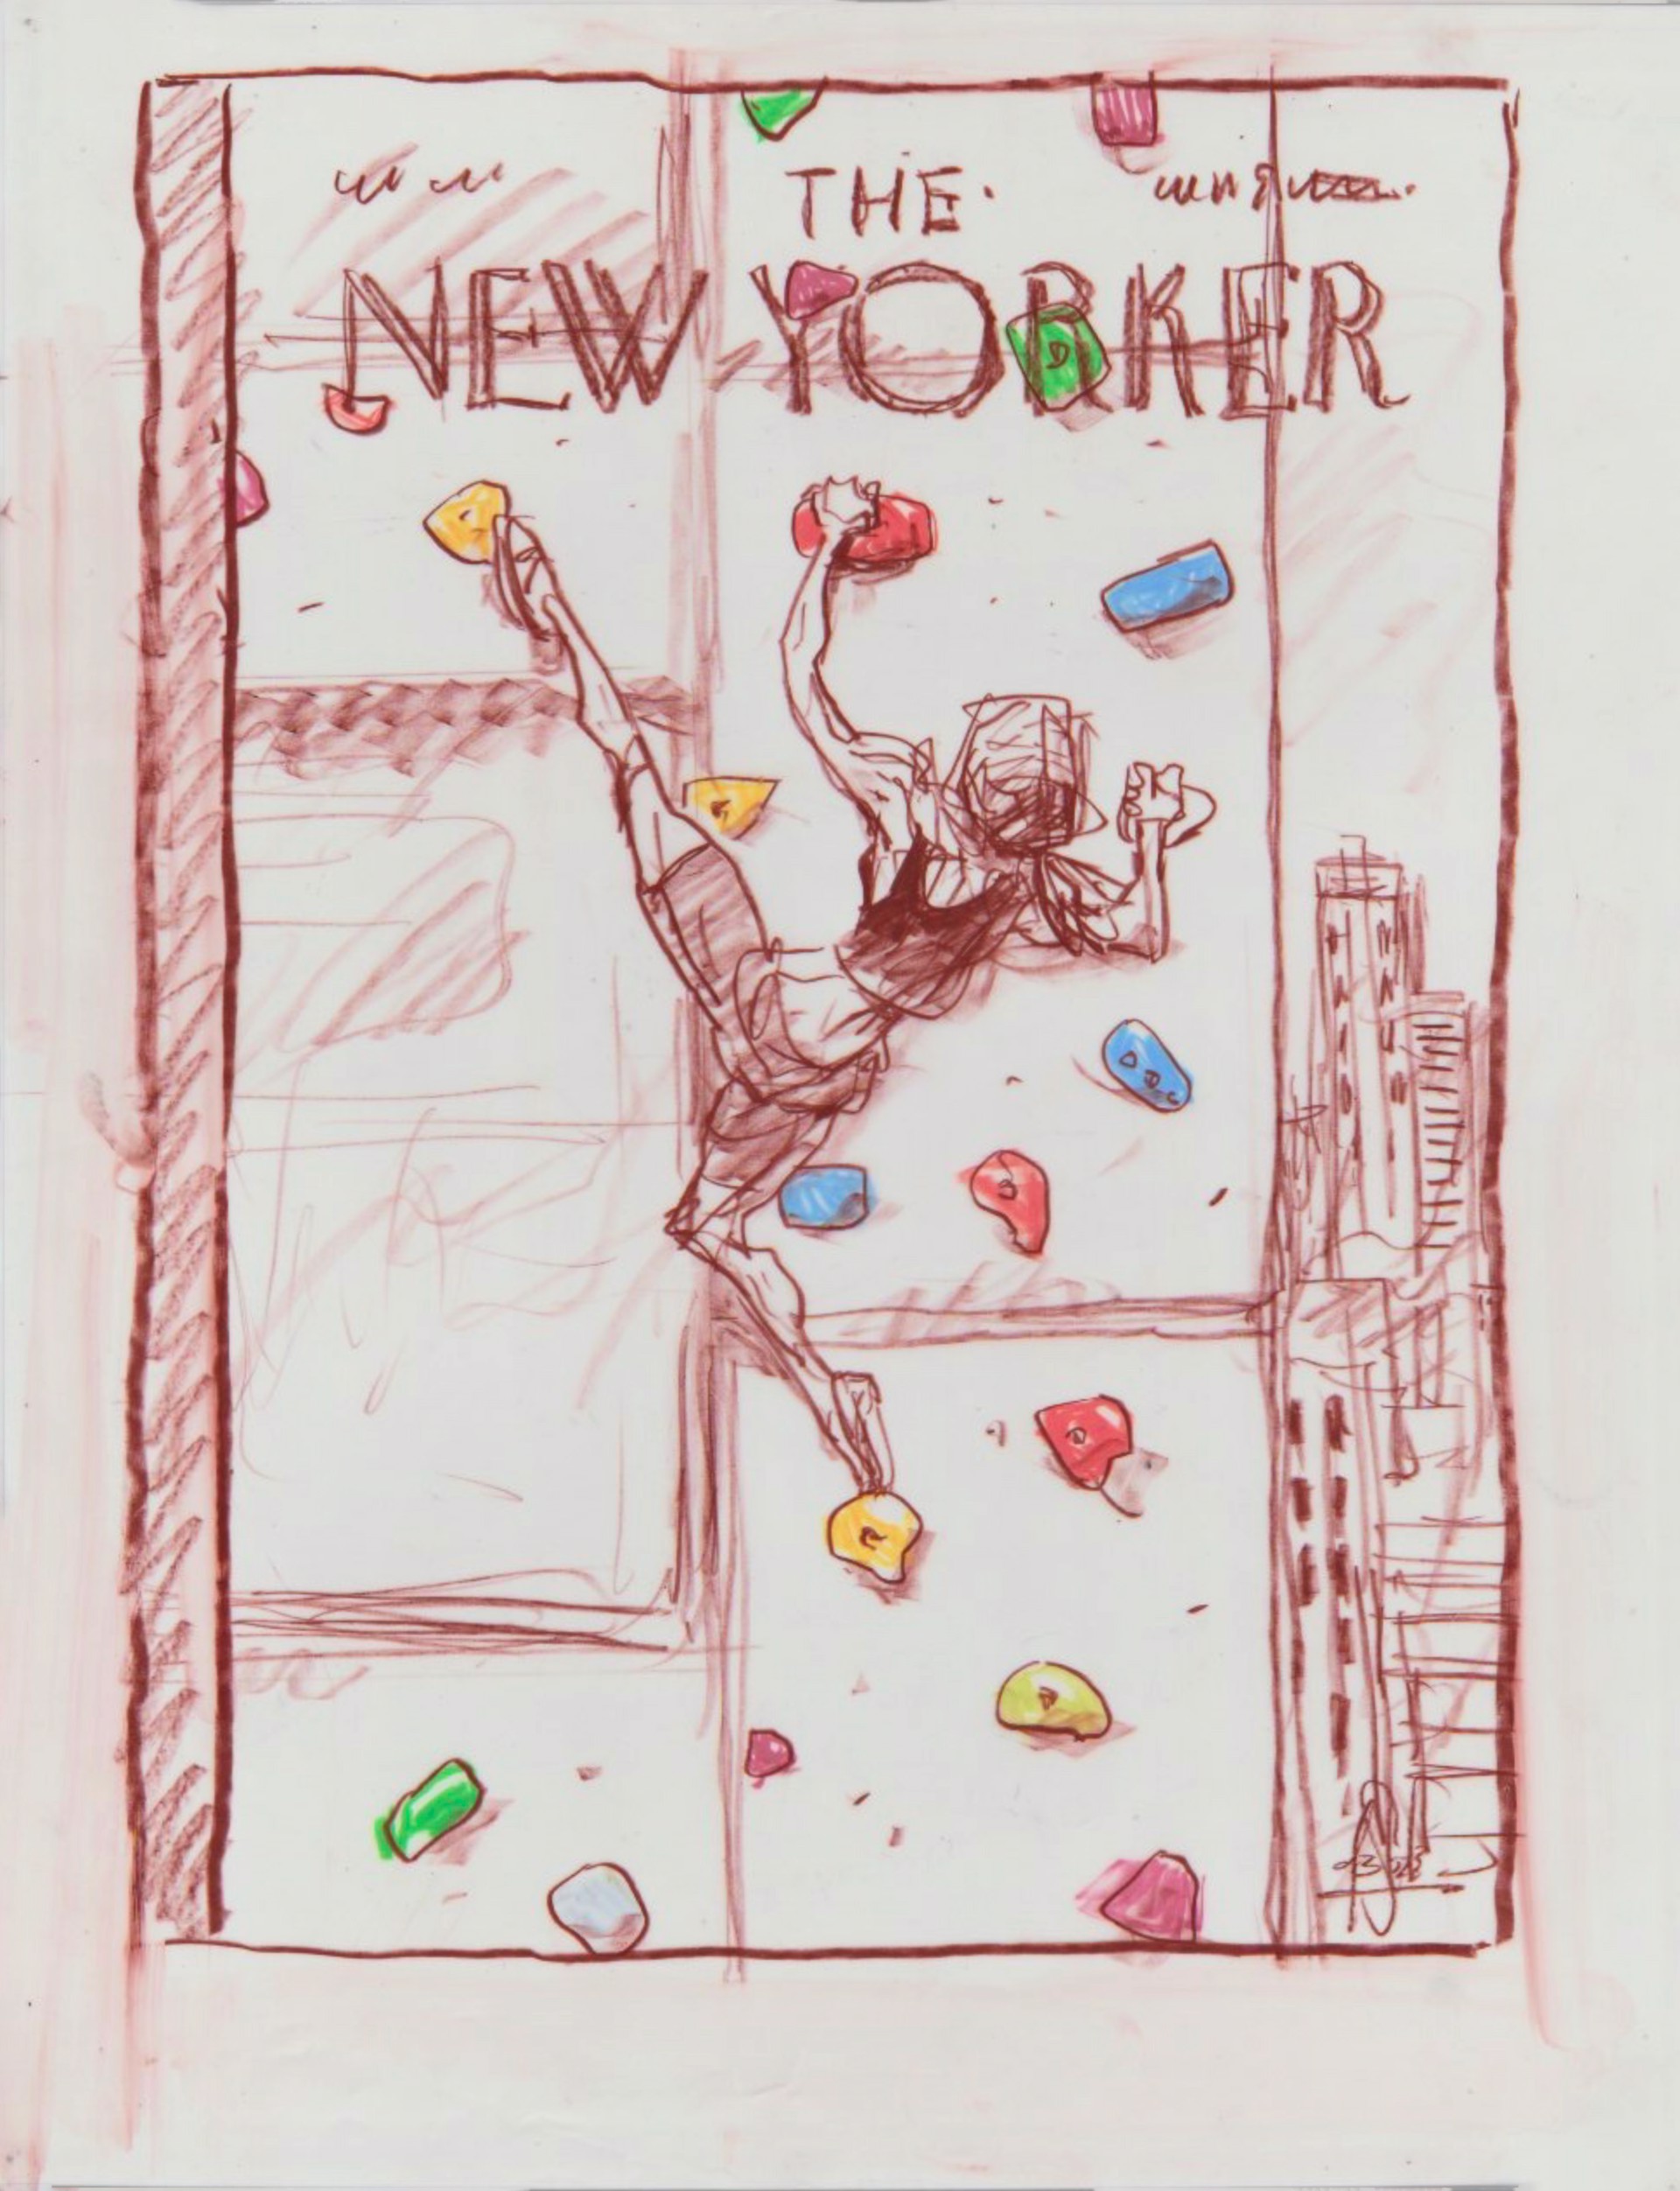 Proposed sketch for New Yorker Cover "Social Climber" by Peter de Sève